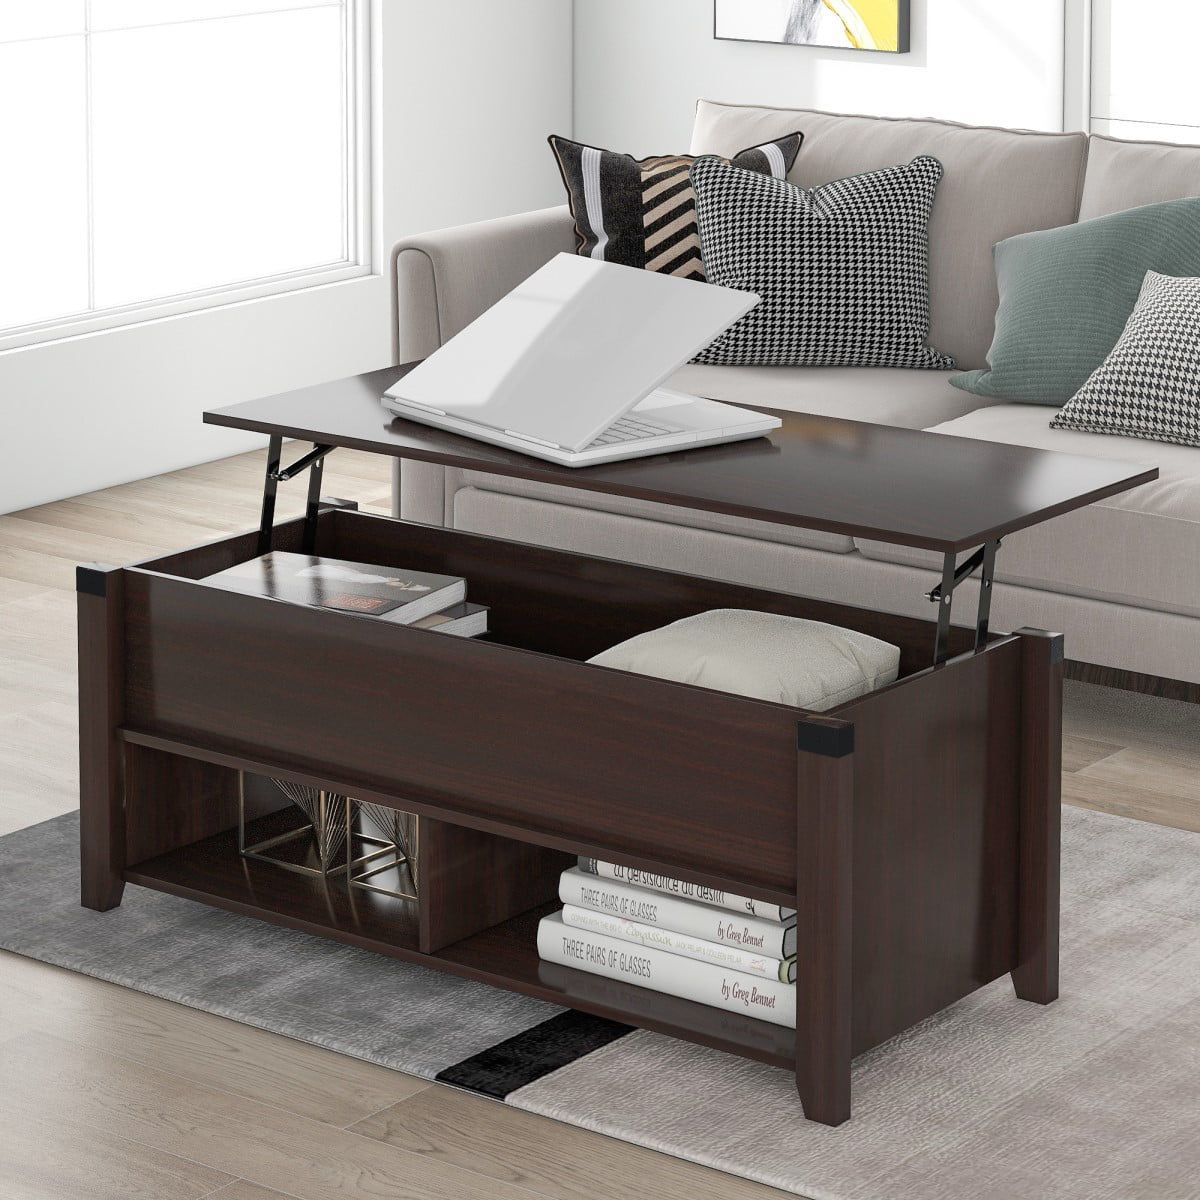 Small Space Lift Top Coffee Table With 2 Storage Compartments, Espresso Within Lift Top Coffee Tables With Shelves (View 8 of 20)